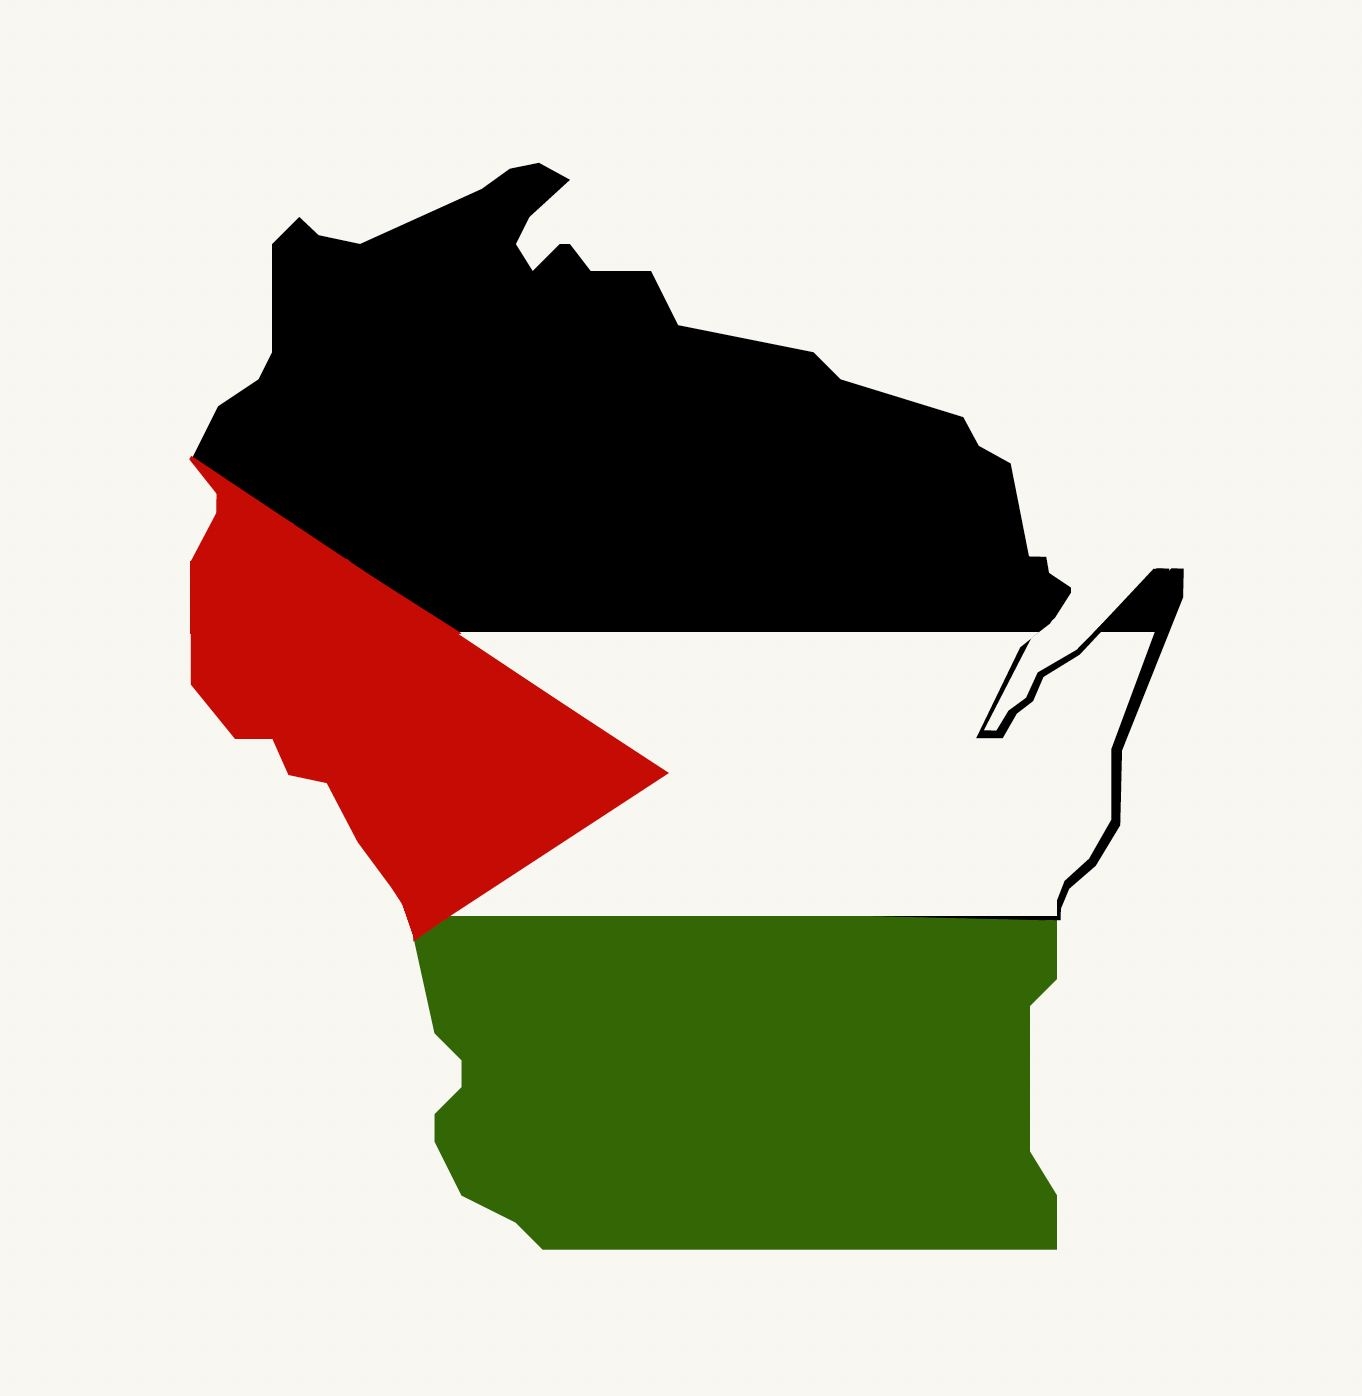 Wisconsin Coalition for Justice in Palestine to hold Press Conference in support of South Africa’s Charges of Genocide Brought Against Israel